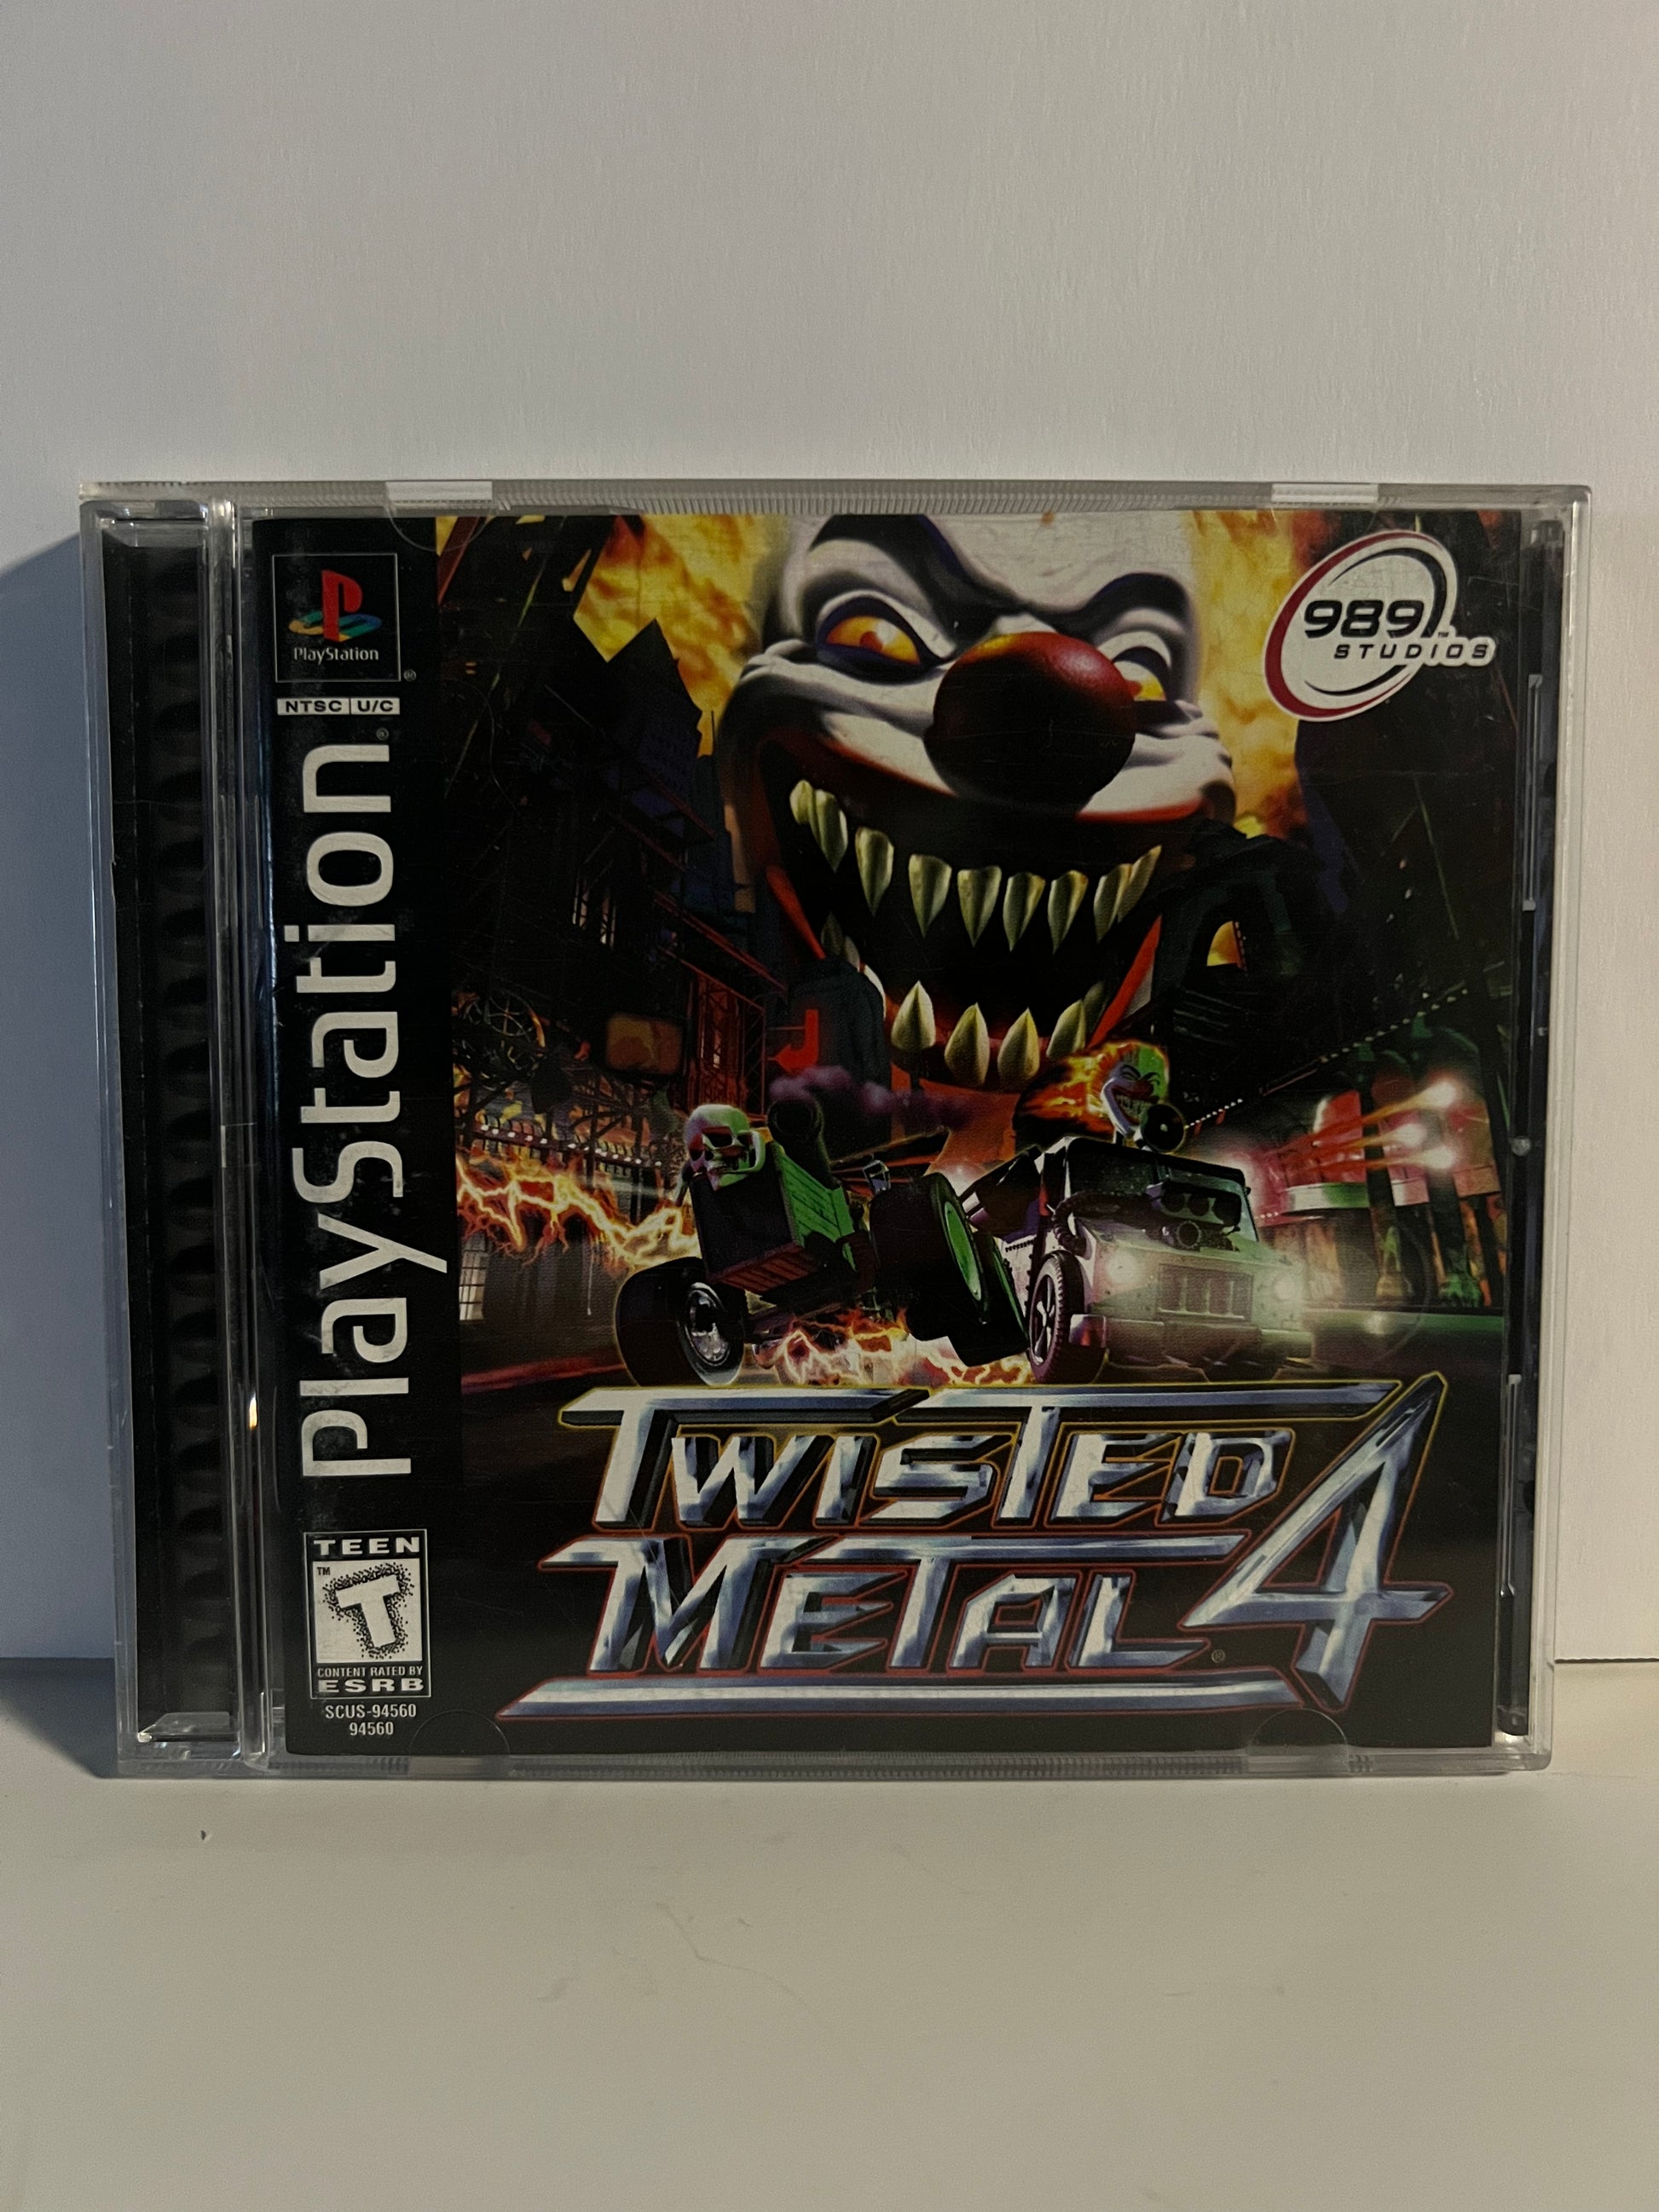 Twisted Metal (PS1) Gameplay 